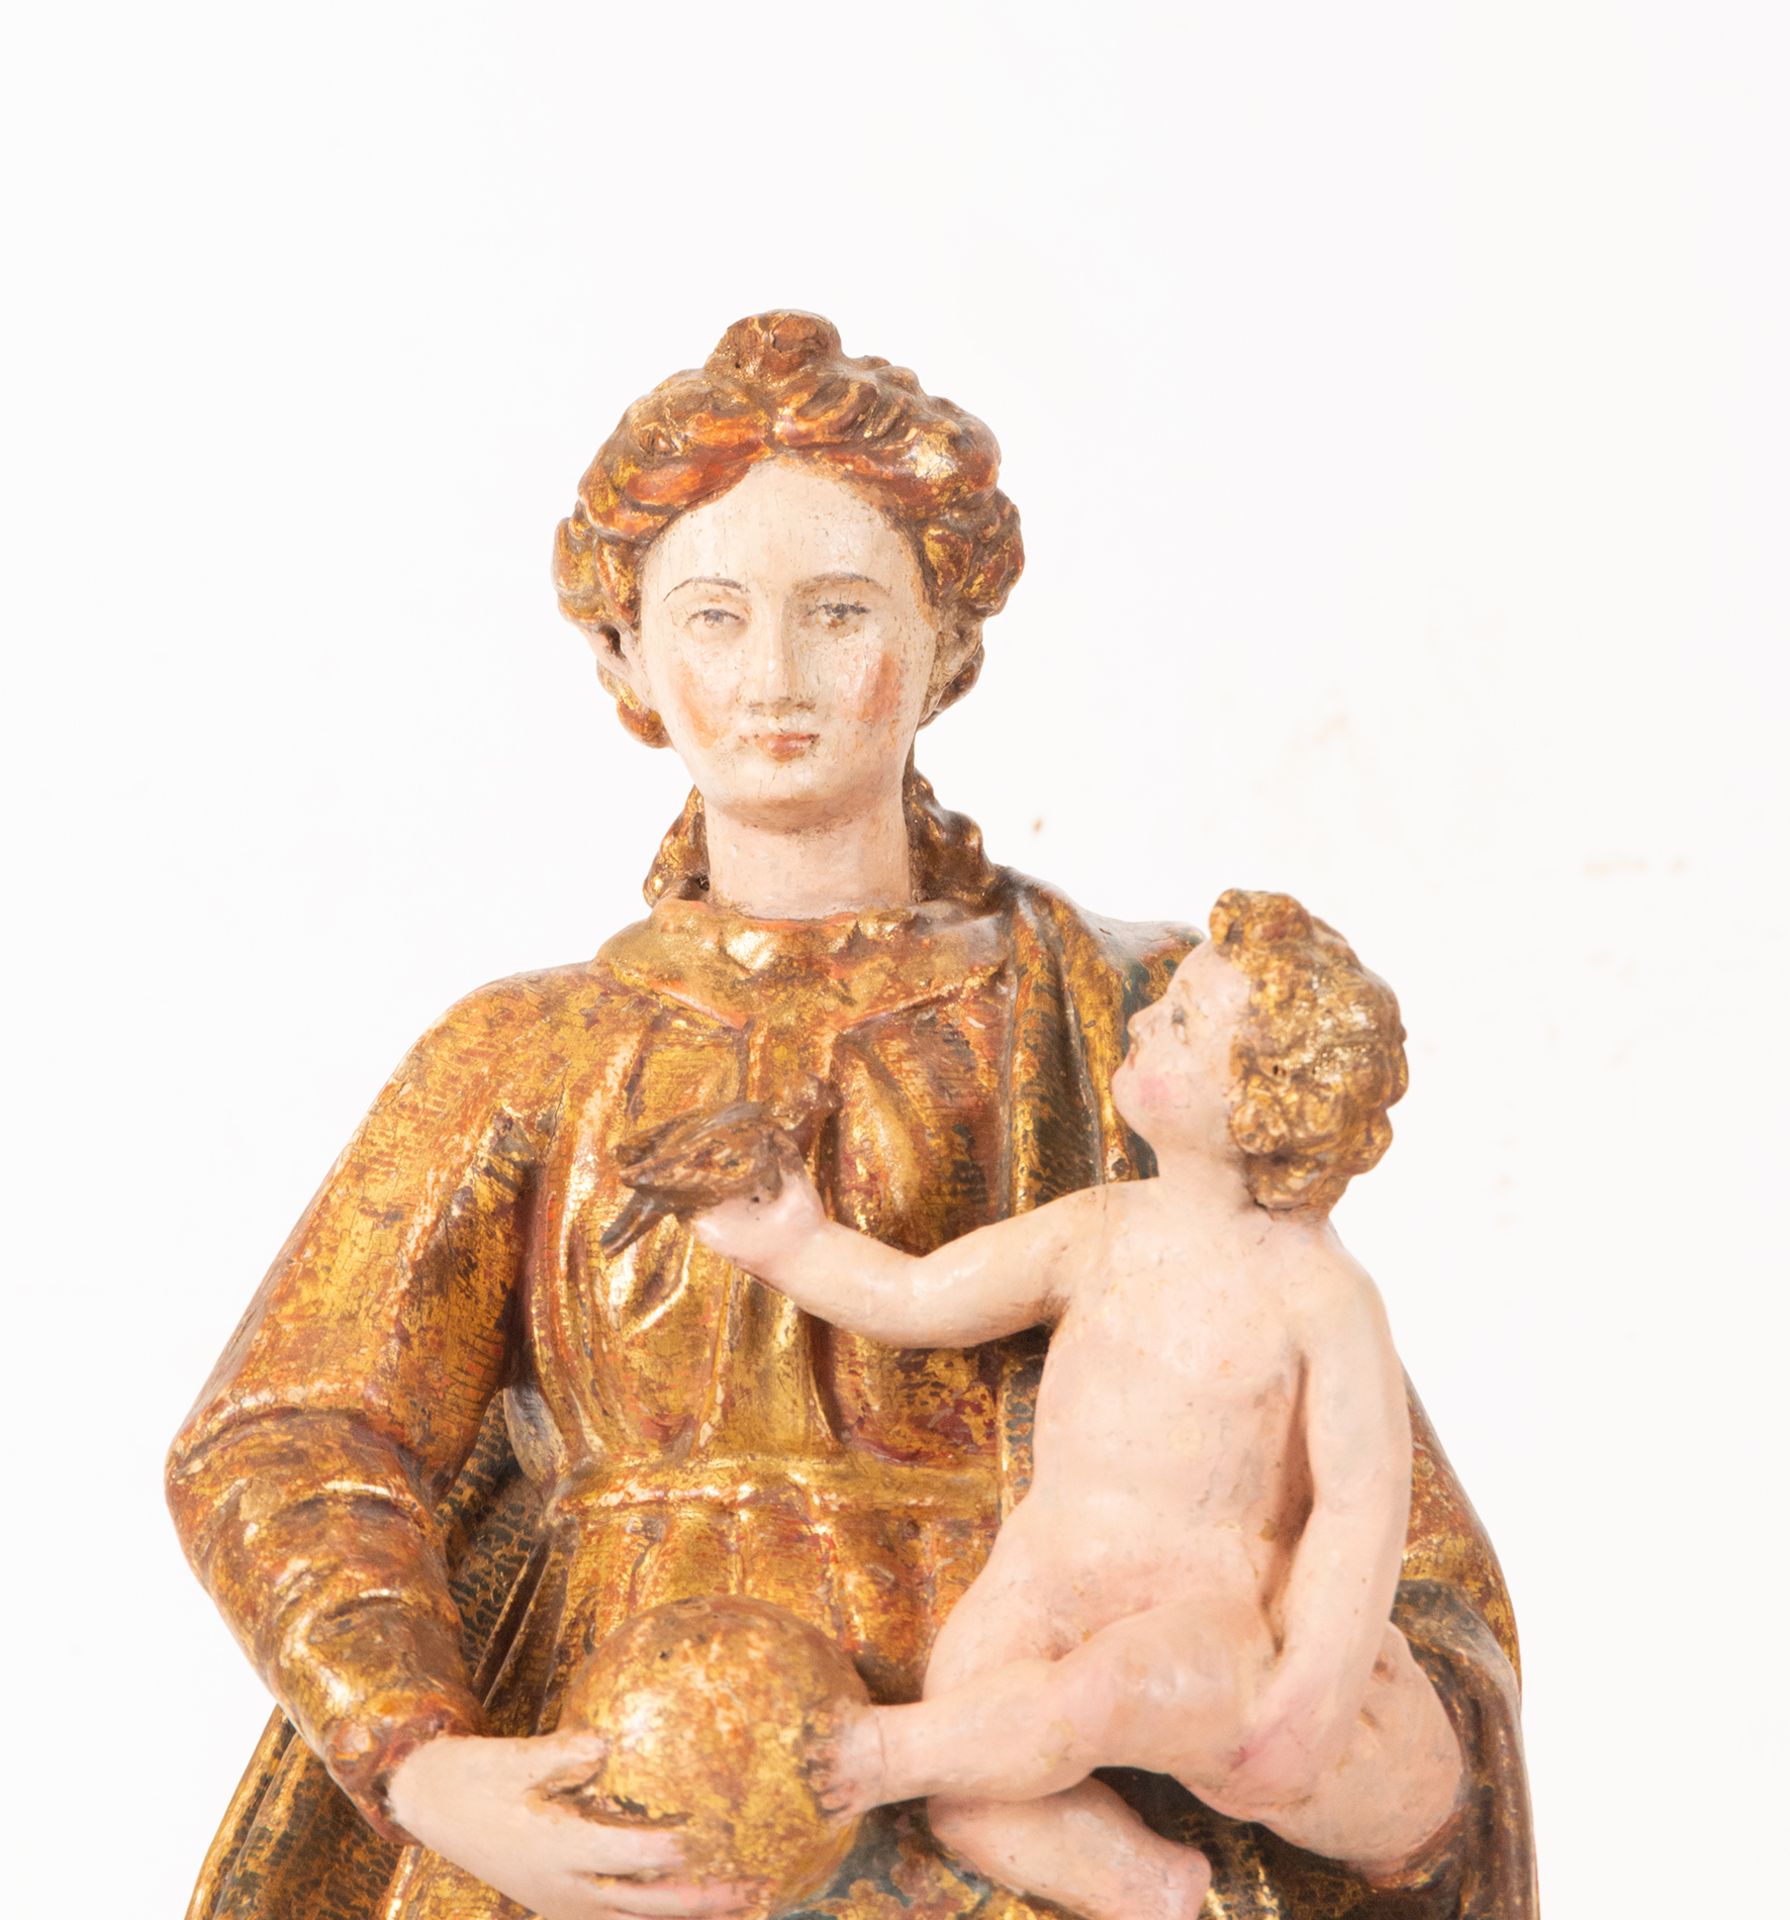 Important Virgin with Child in her arms, Hispano-Flemish school of the 16th century - Image 2 of 11